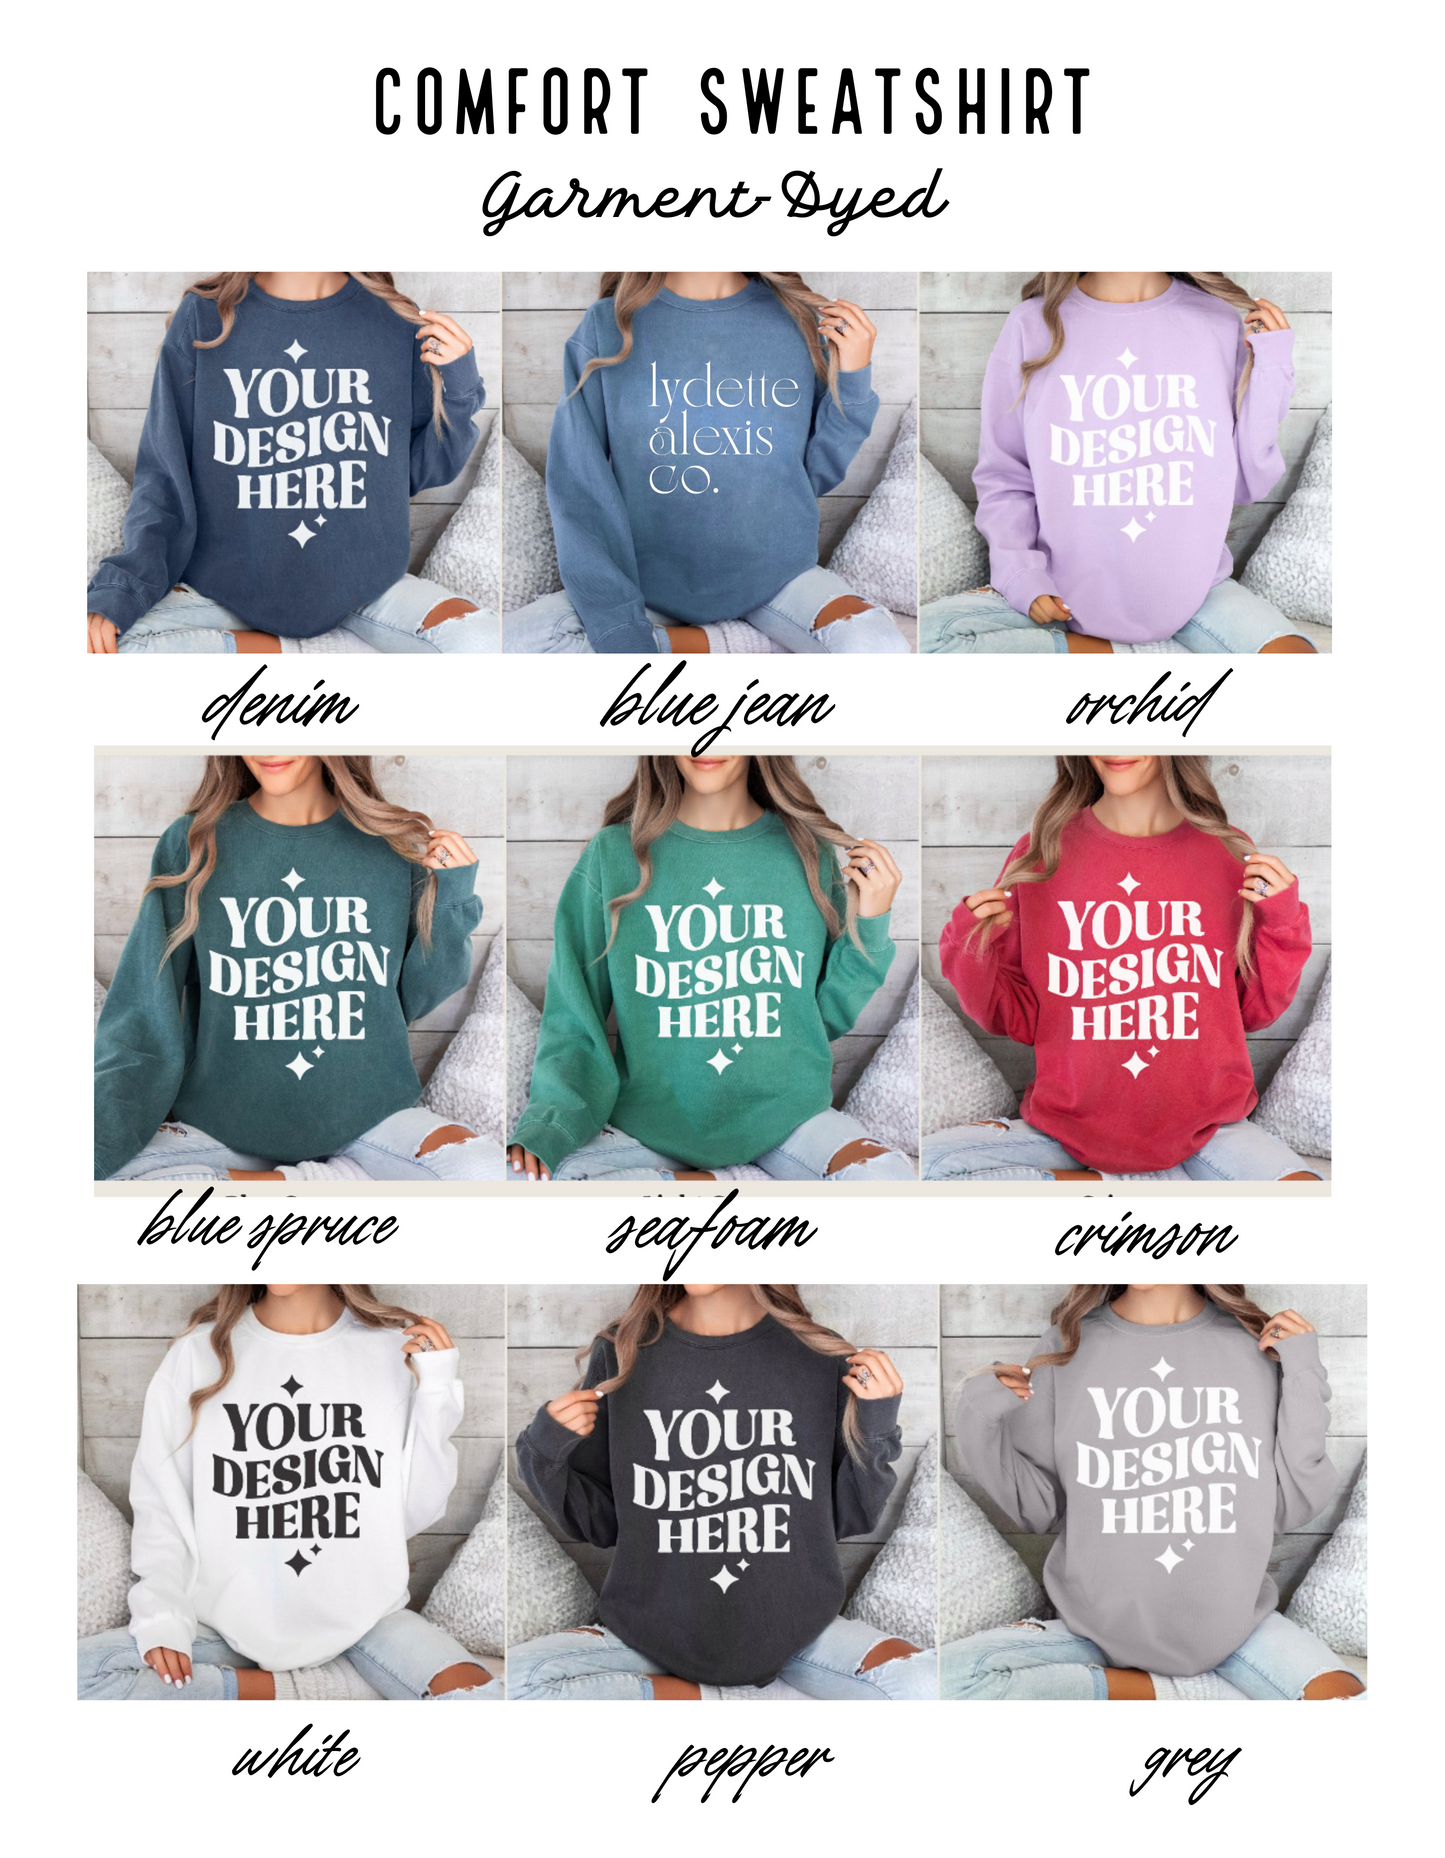 DESIGN YOUR OWN-Comfort Pullover